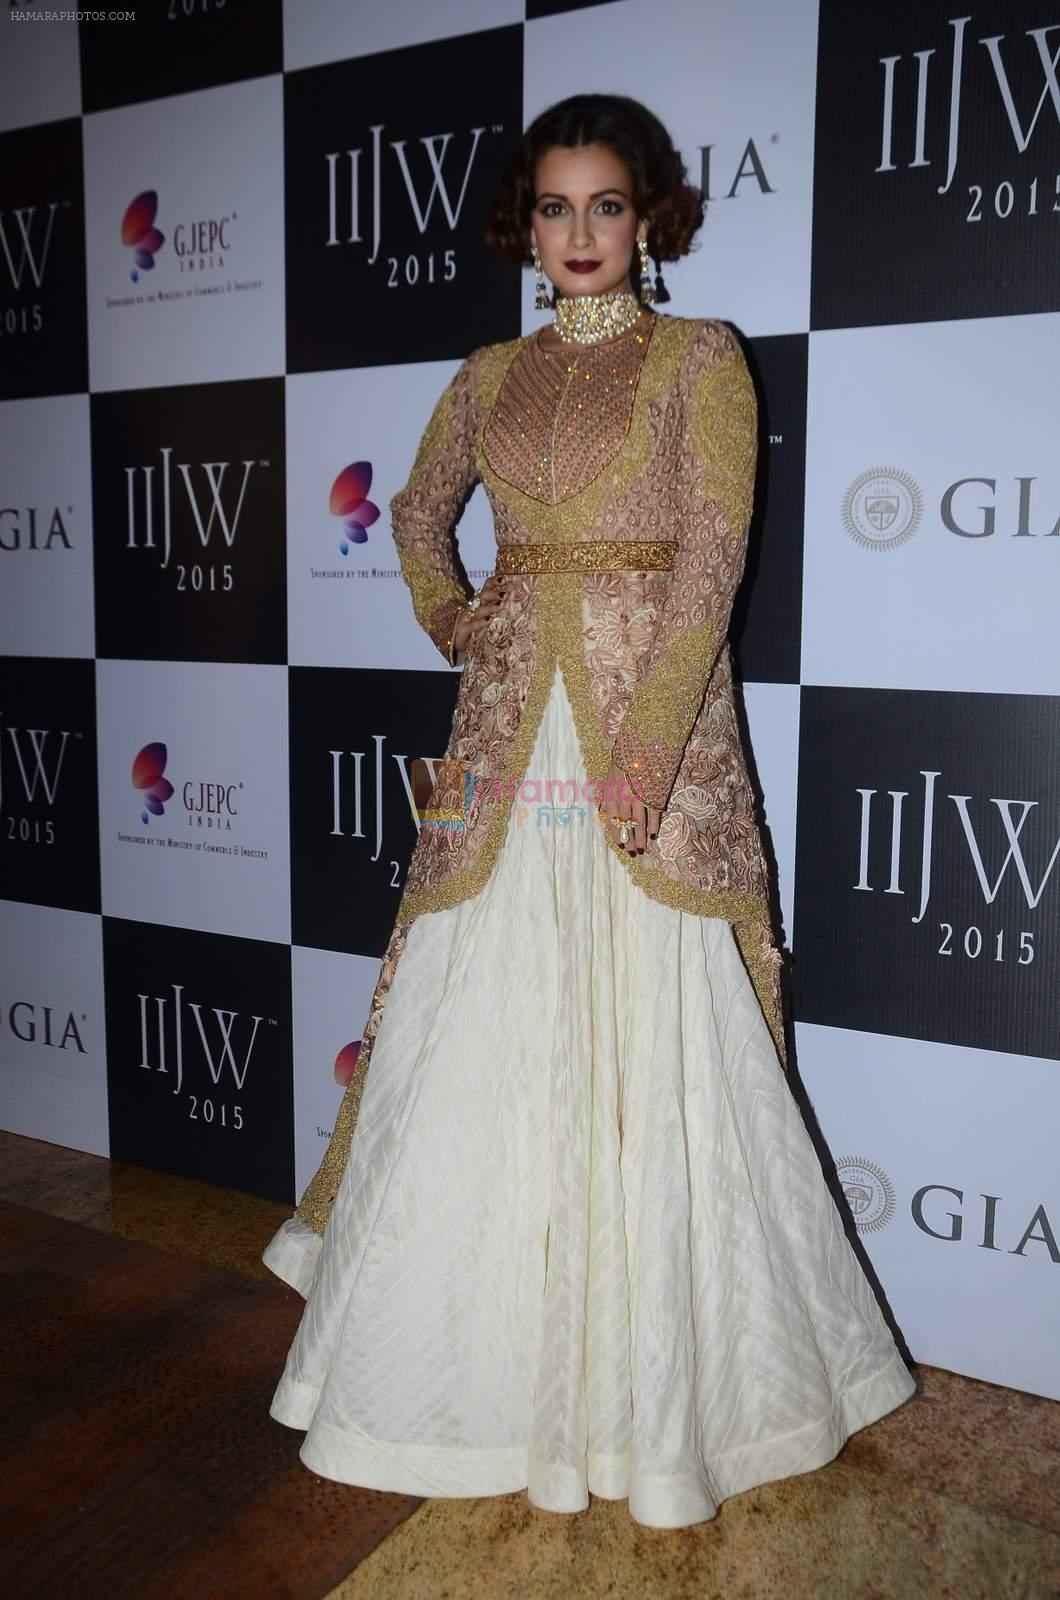 Dia Mirza on Day 3 of IIJW 2015 on 5th Aug 2015